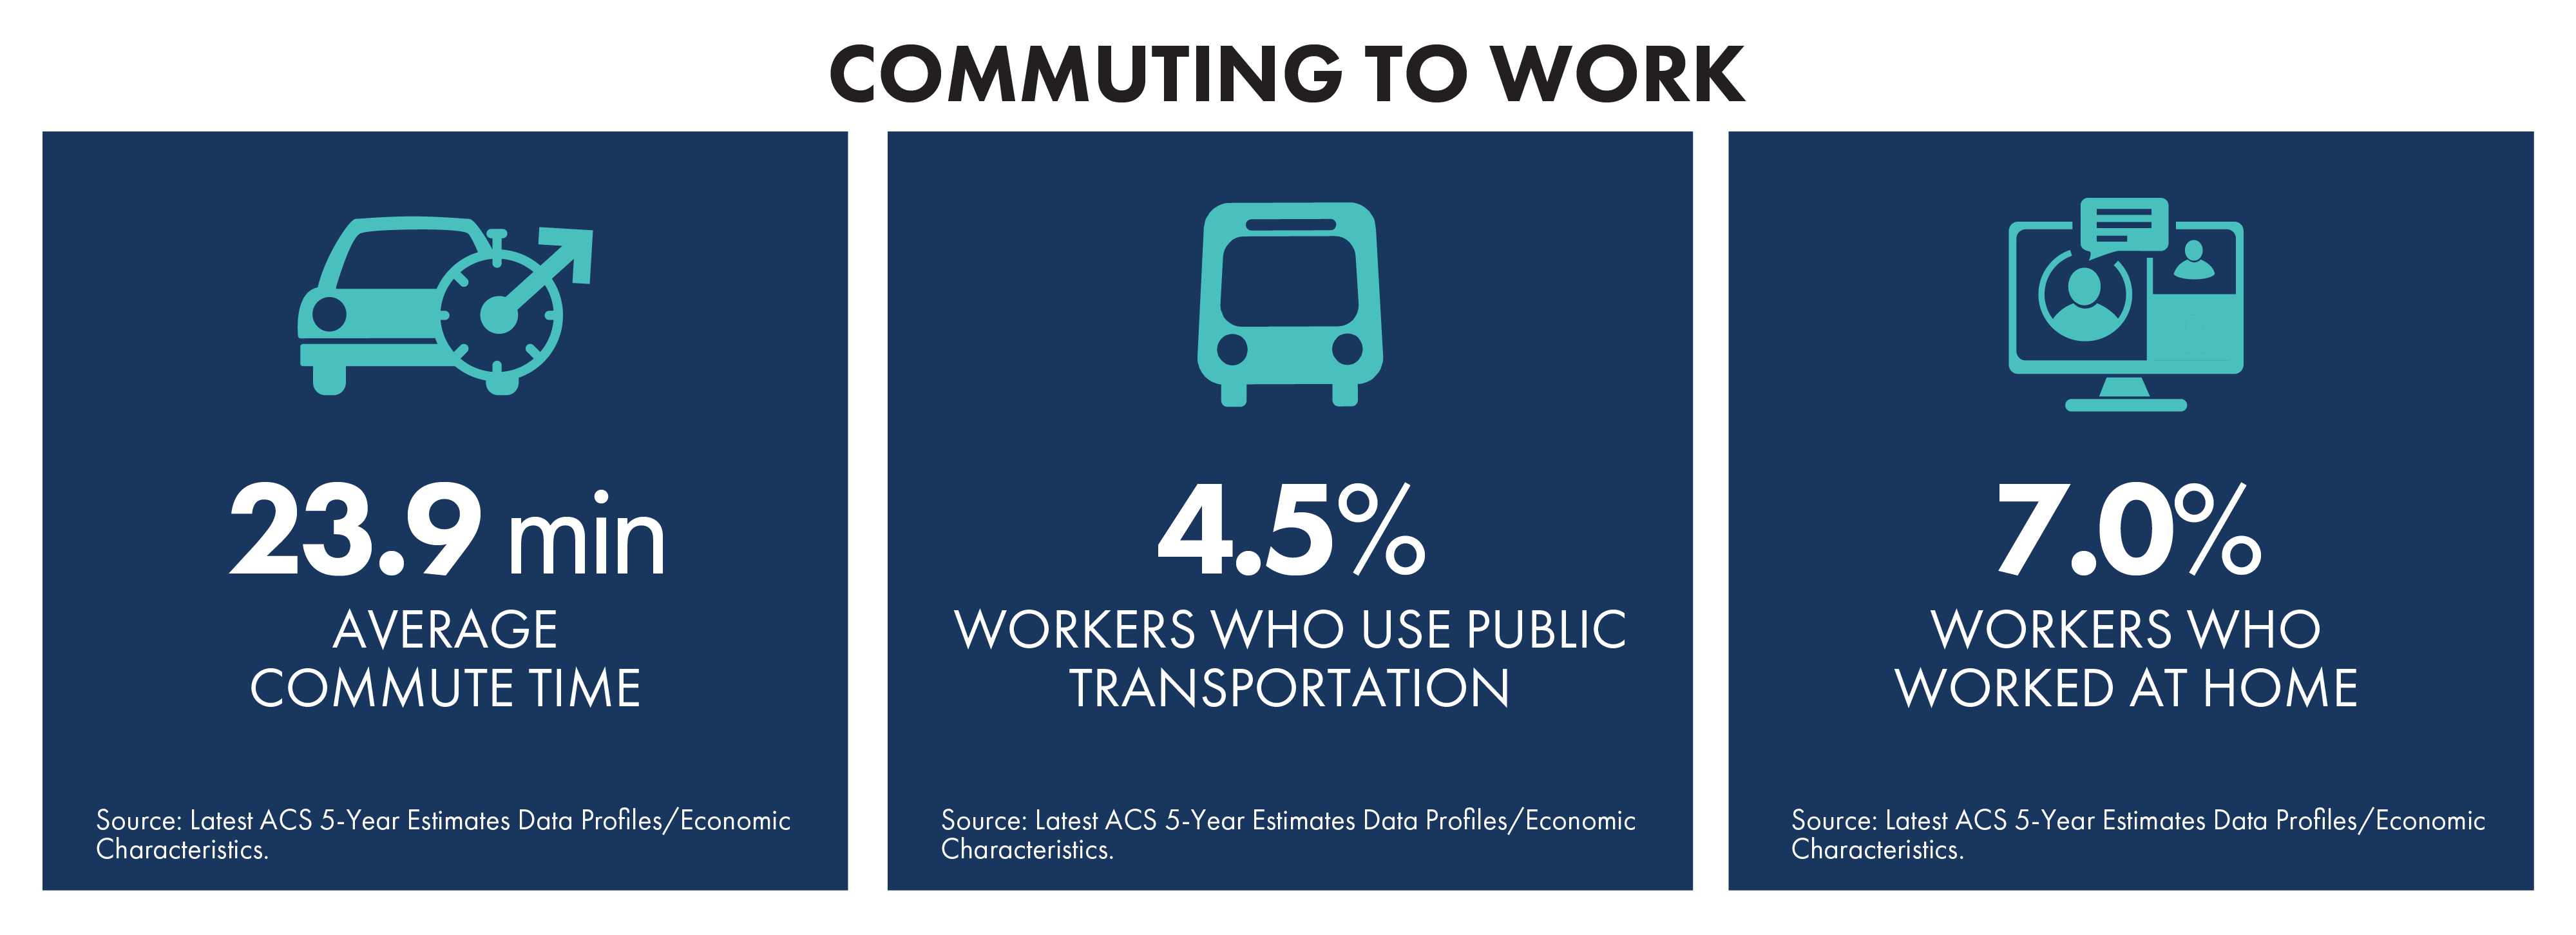 Statistics for Oregonians communiting to work with a 23.9 minute average commuting time, 4.5% workers who use public transportation and 7% works who worked at home.